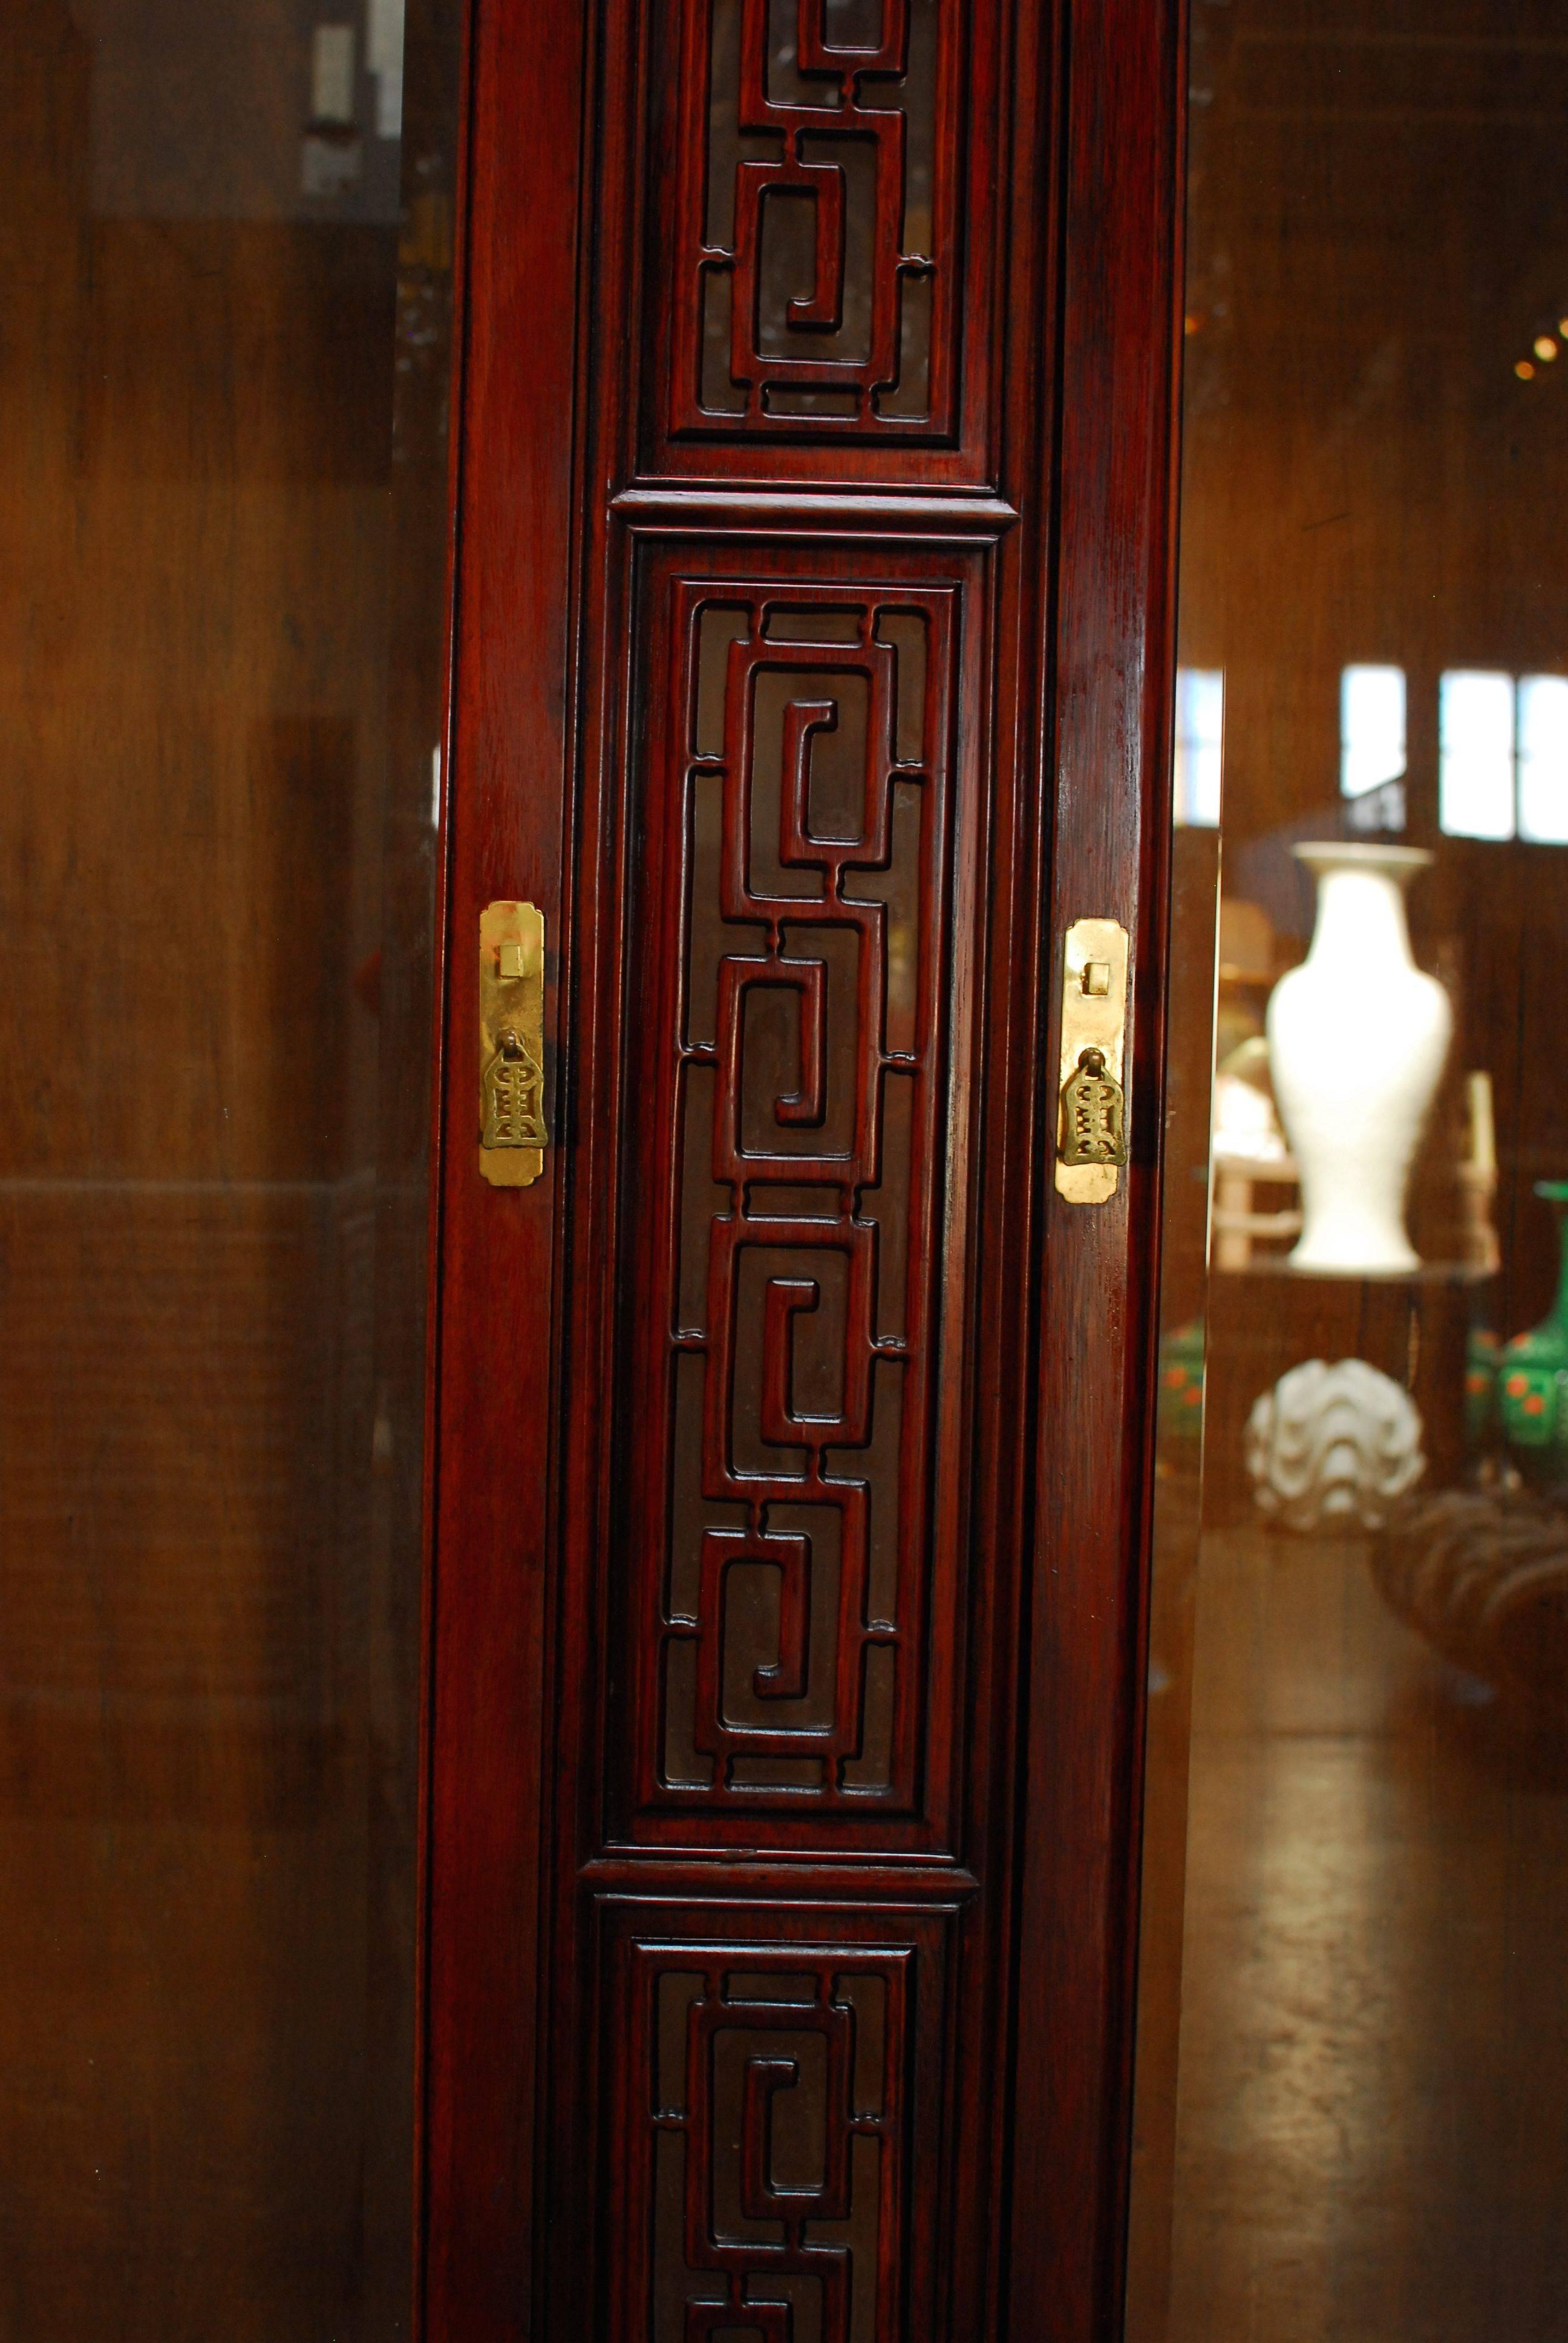 Asian carved rosewood display cabinet with Greek key decorated cornice and front panel. Two large front doors with beveled glass and brass lock plates. Interior has four adjustable glass shelves and beveled glass on each side of the case. The